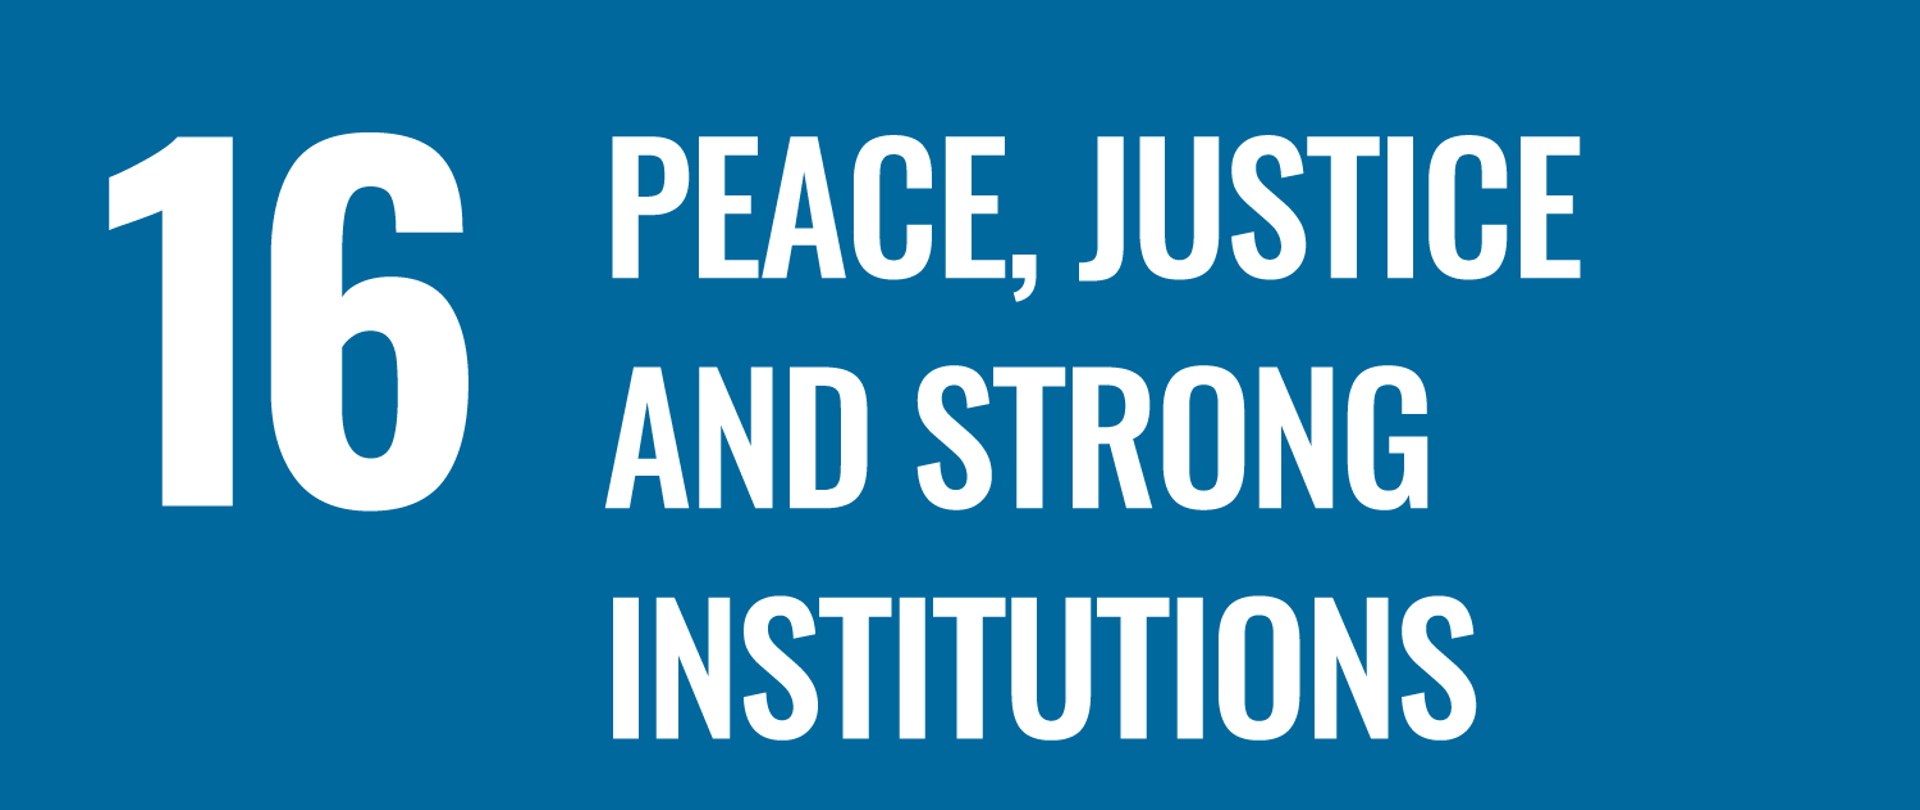 16 Peace, justice and strong institutions